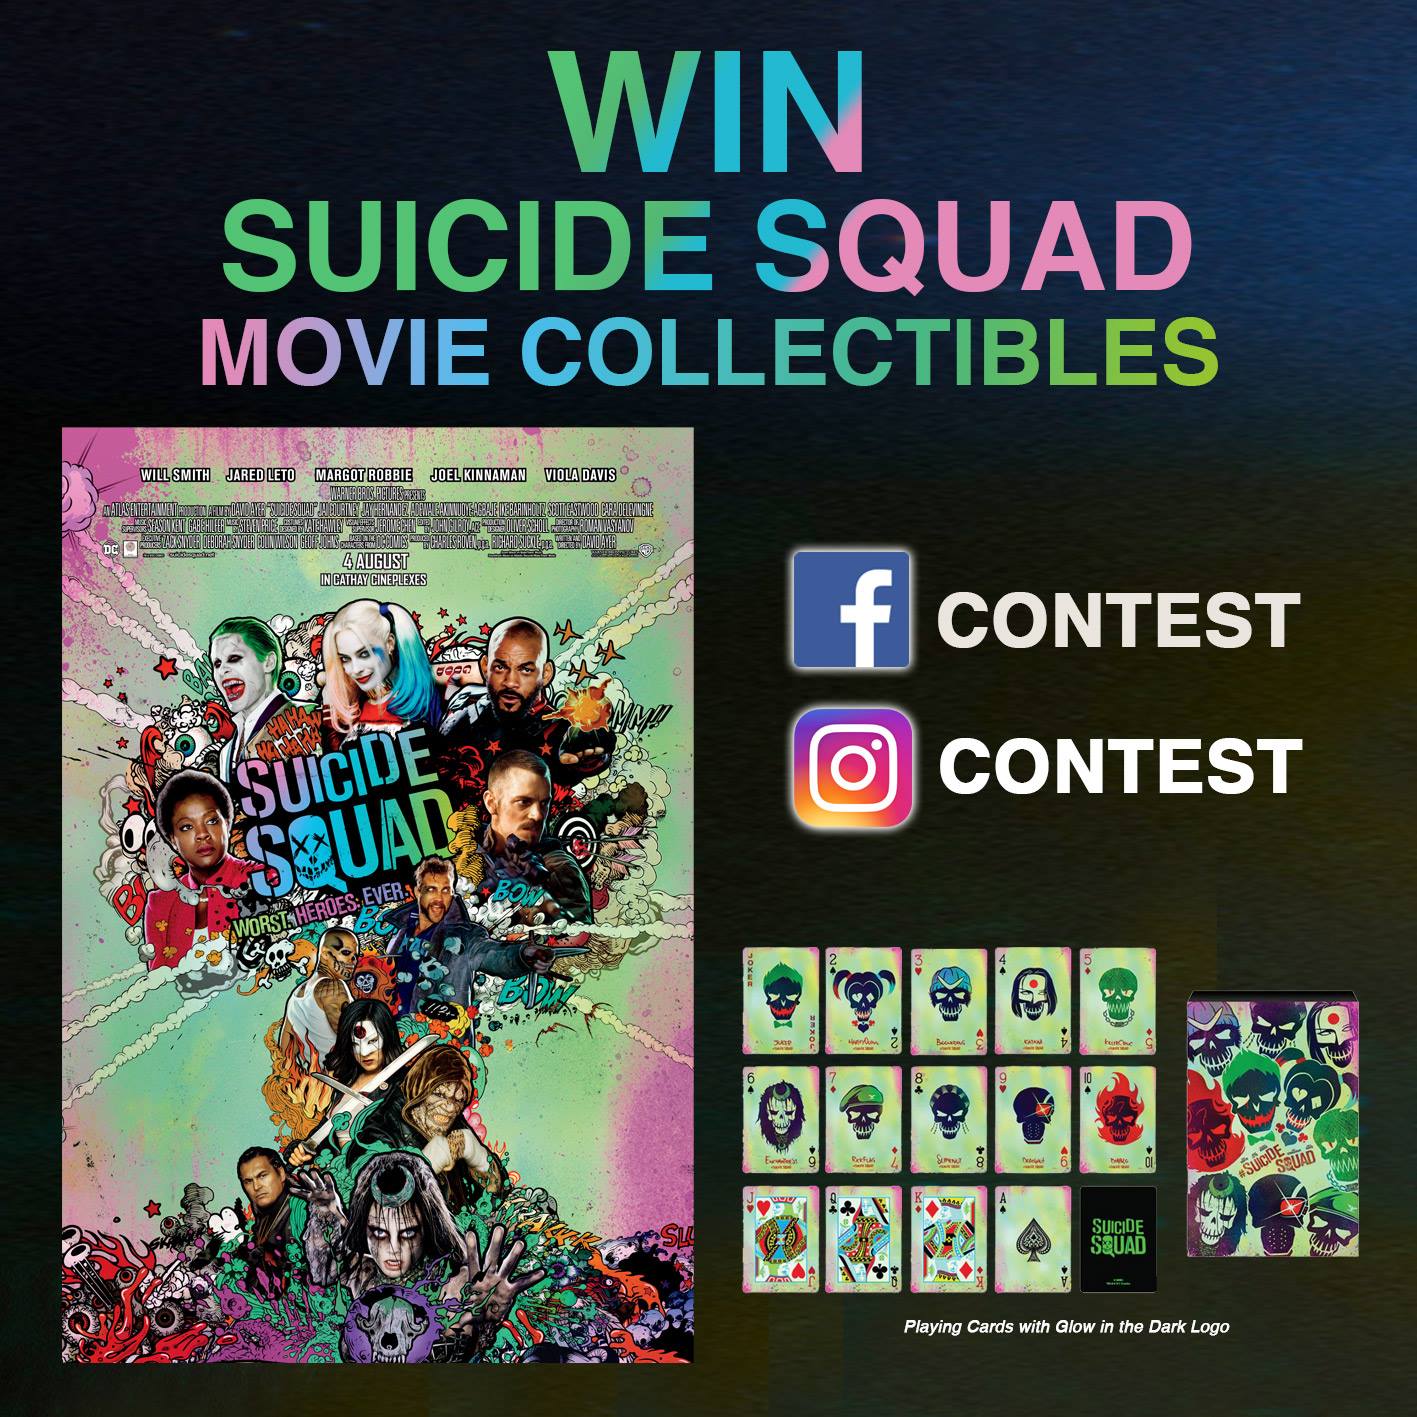 Cathay Cineplexes Suicide Squad Singapore Contest ends 7 Aug 2016